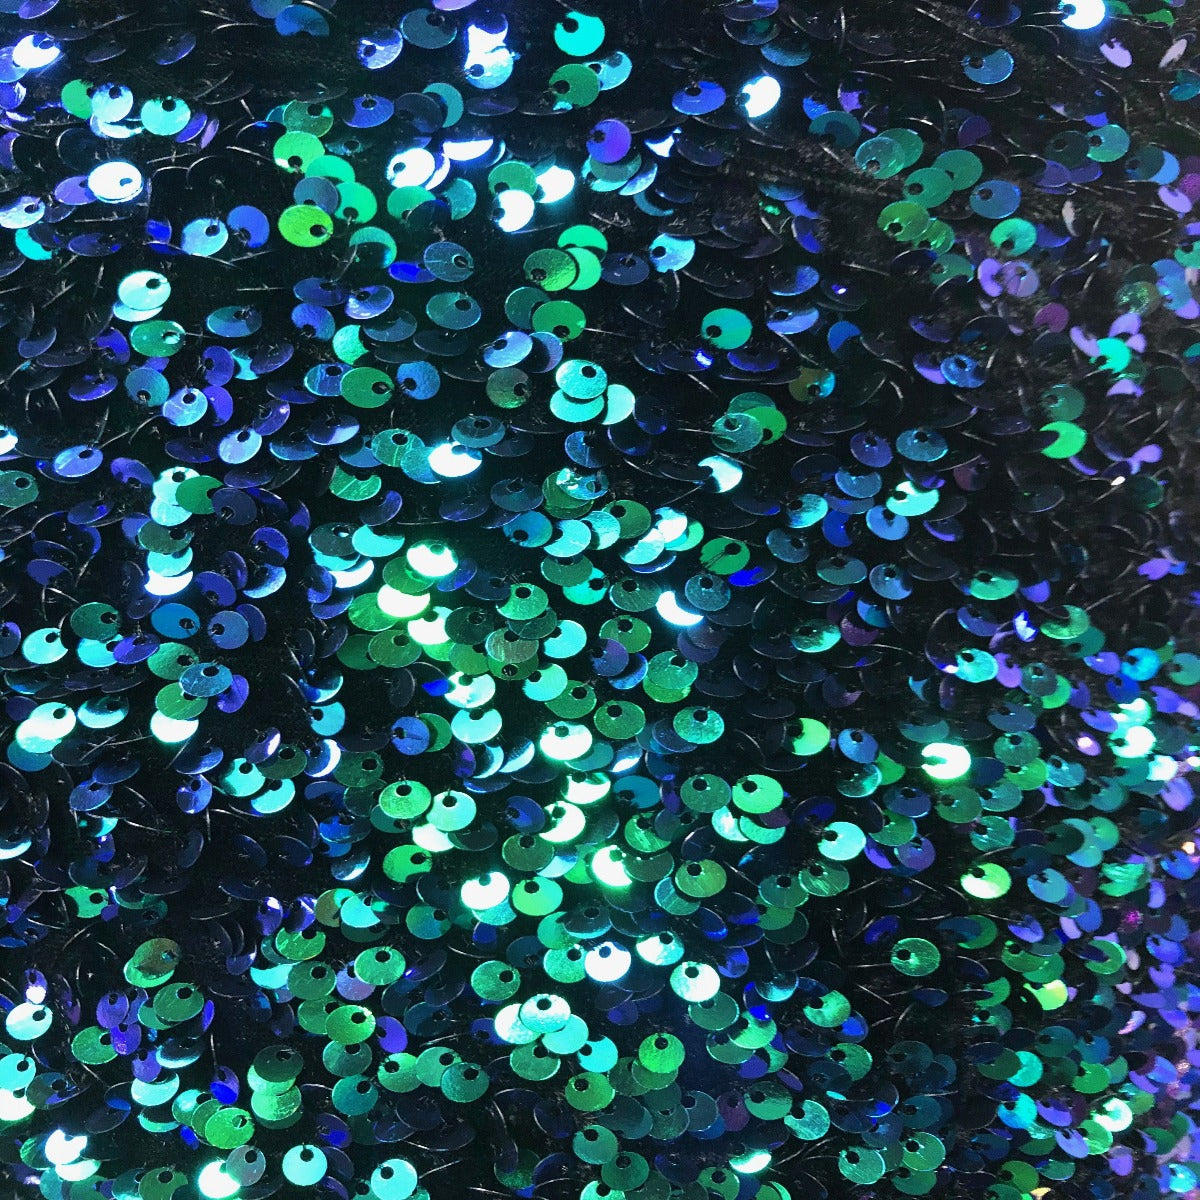 Green Iridescent Sequins Embroidered Stretch Velvet Rodeo Fabric - Fashion Fabrics LLC